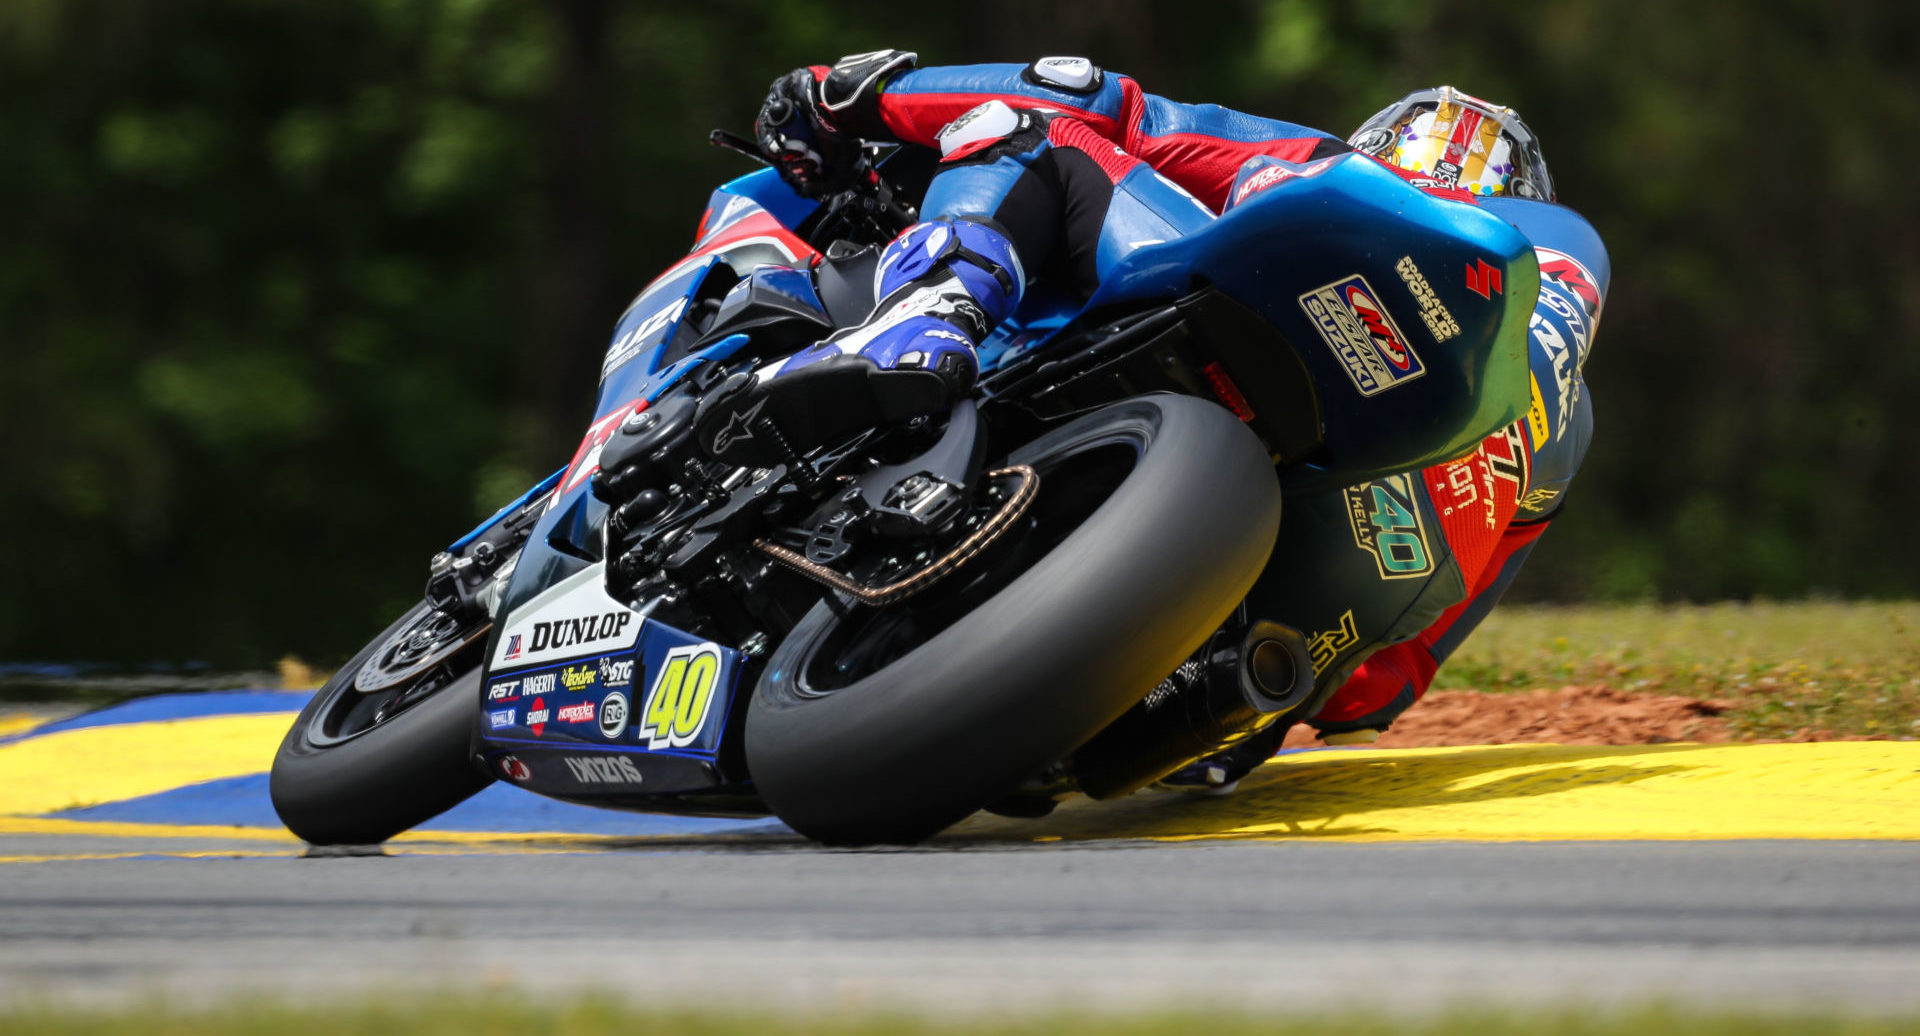 Sean Dylan Kelly (40) leads the MotoAmerica Supersport Championship heading into VIR. Photo by Brian J. Nelson, courtesy MotoAmerica.